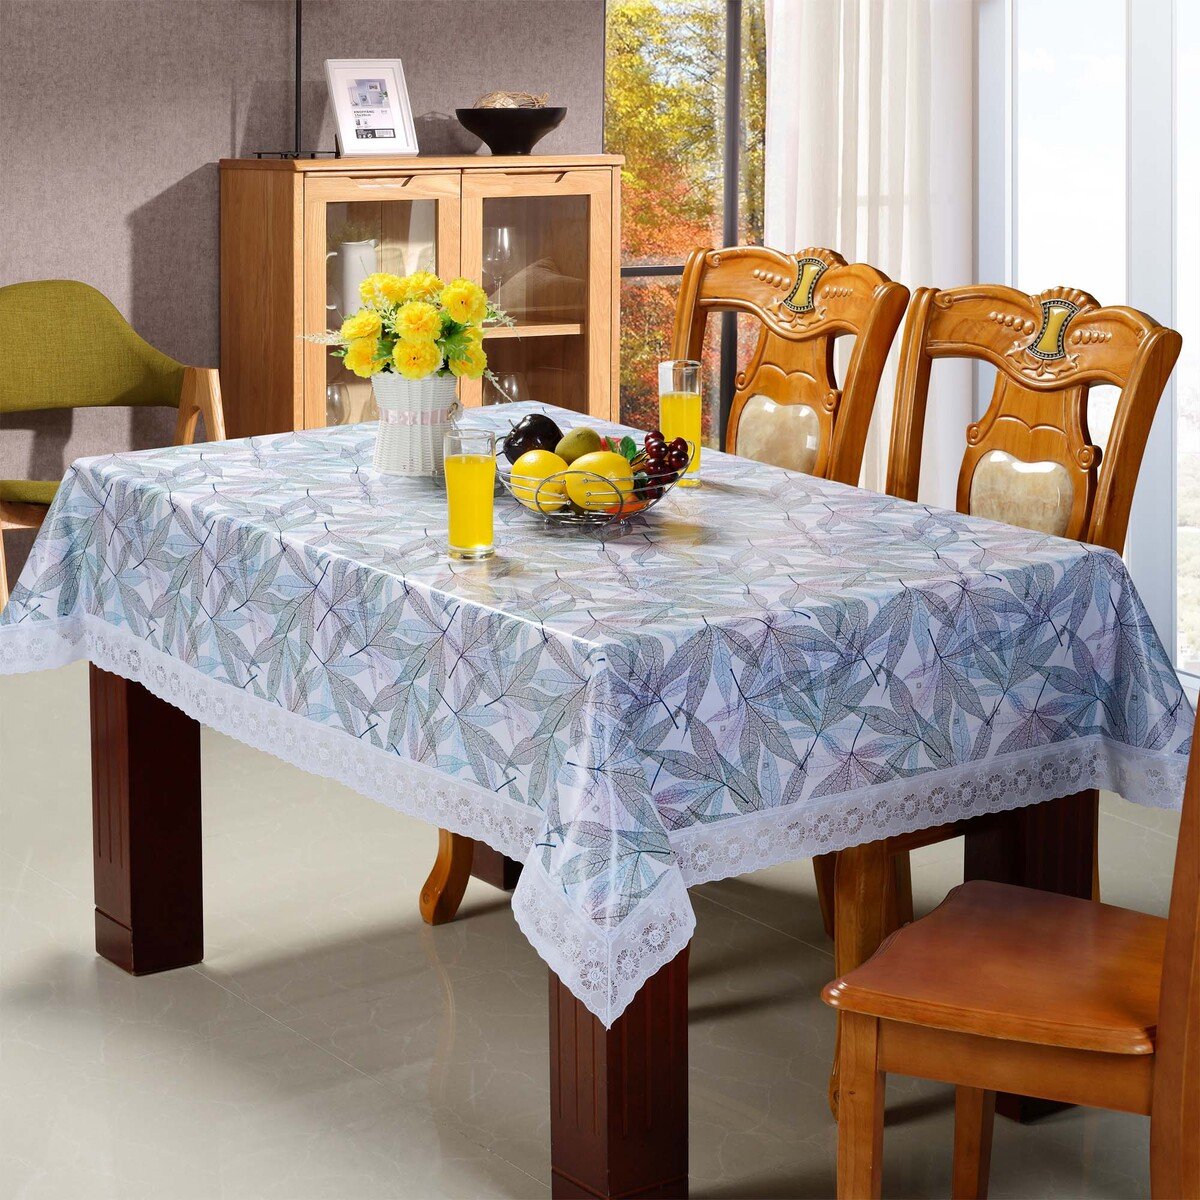 Maple Leaf  Table Cloth Printed Size: W152 x L228cm Assorted Colors & Designs